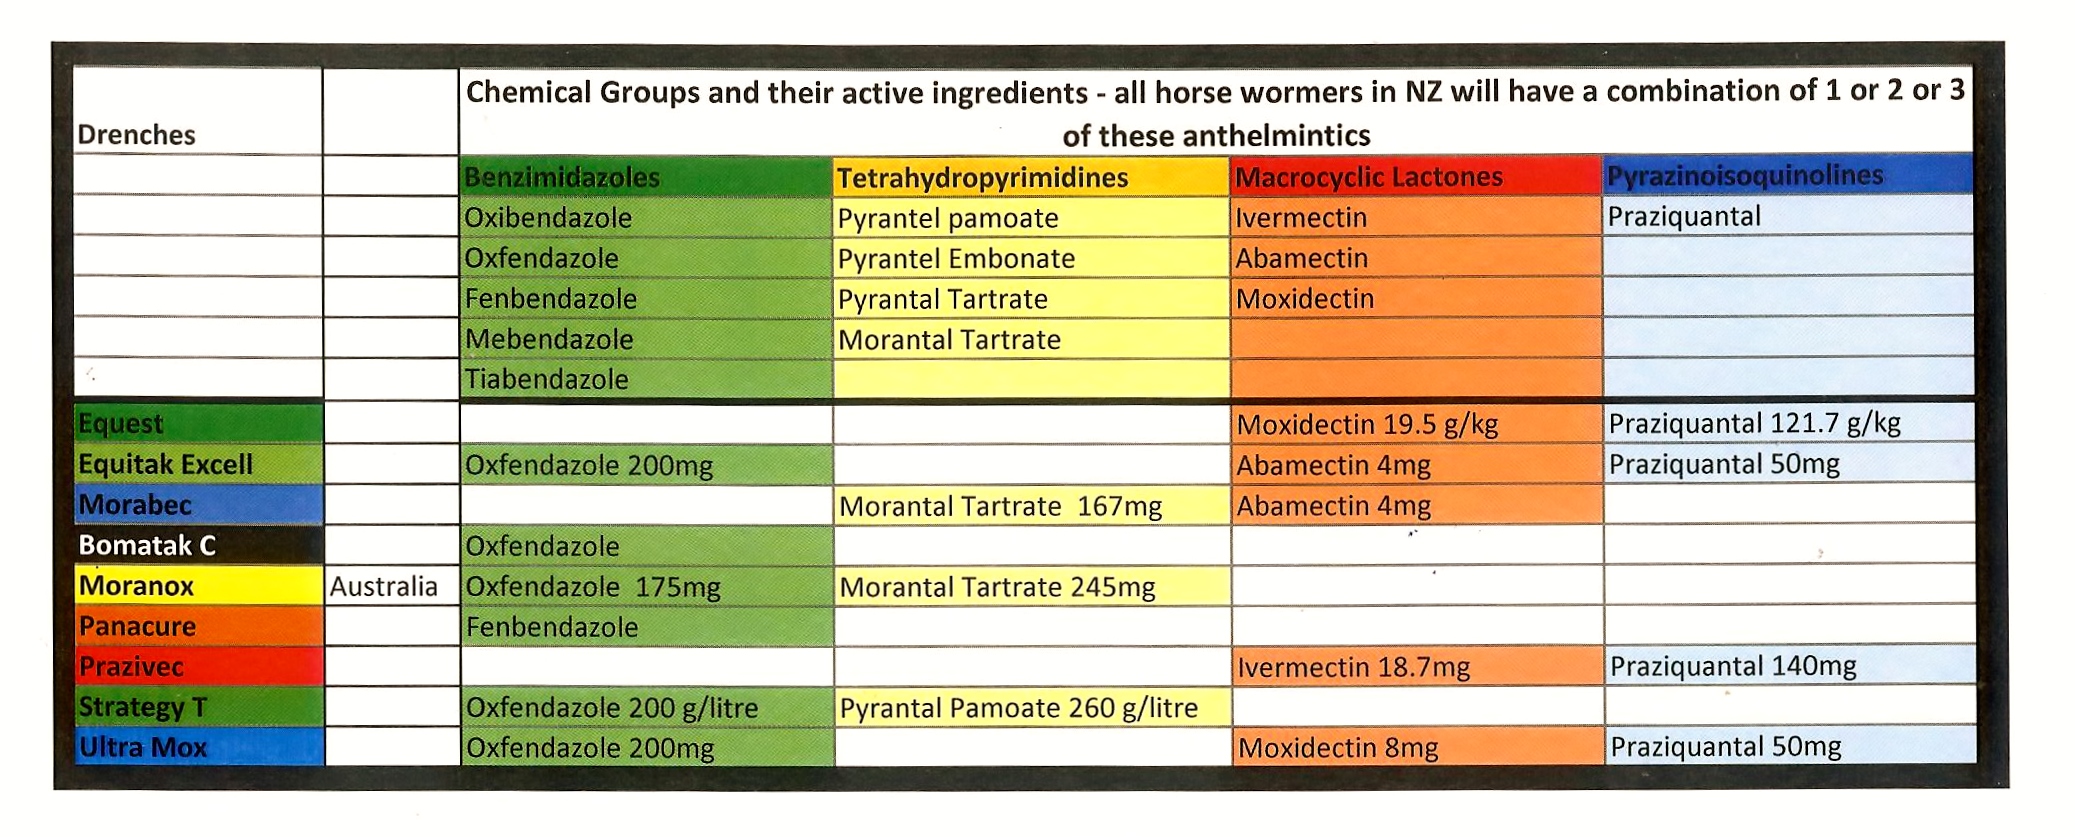 types-of-wormers-active-ingredients-horse-wormers-direct-new-zealand-and-australia